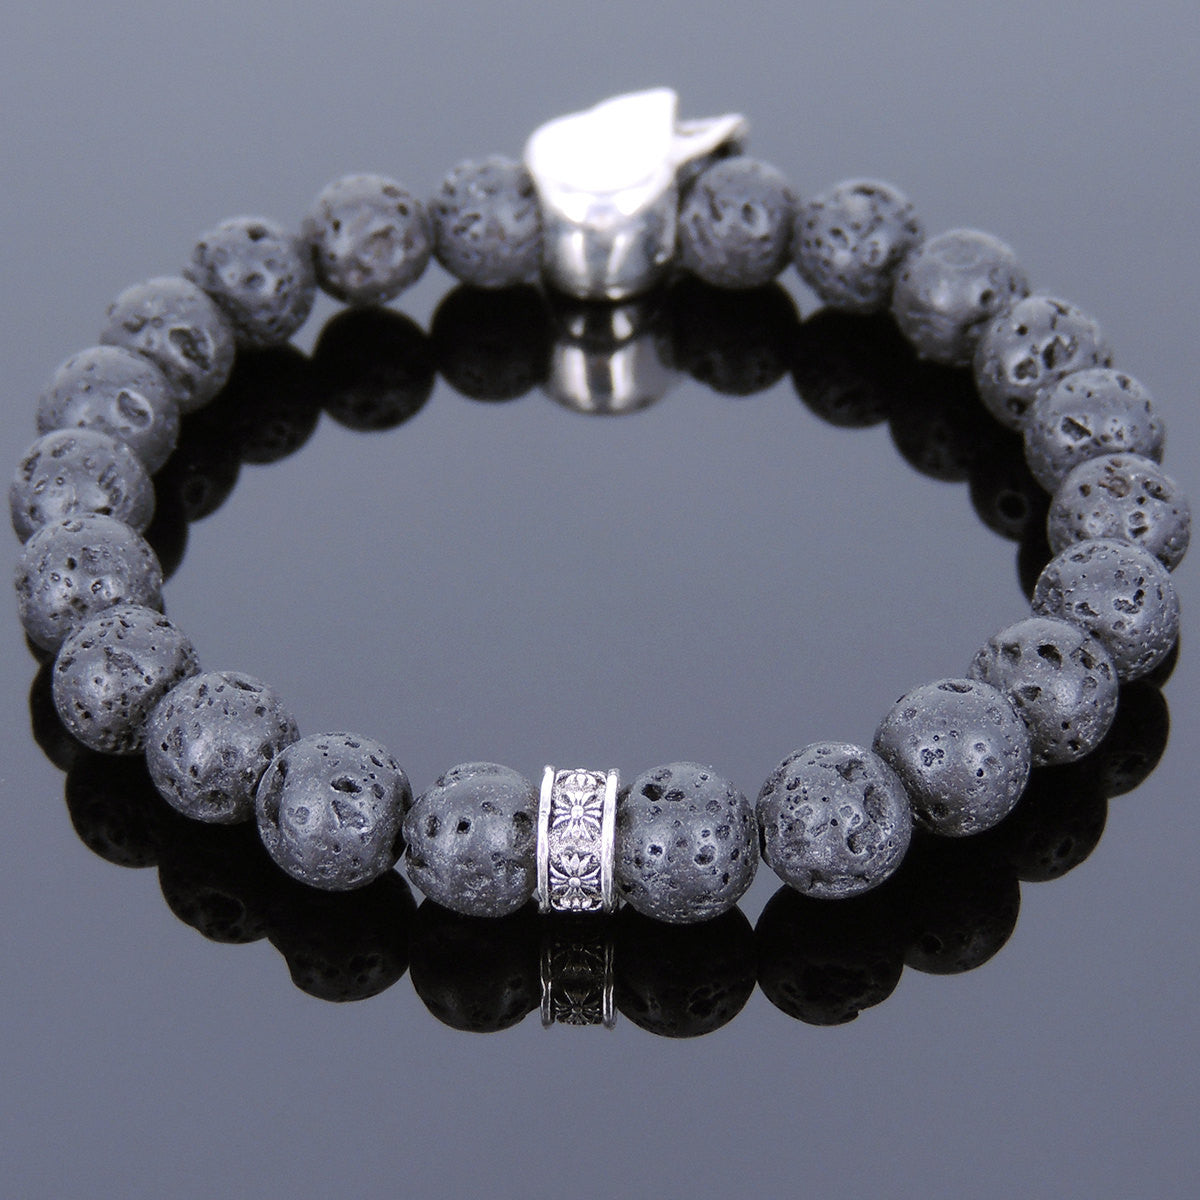 Lava Rock Healing Stone Bracelet with S925 Sterling Silver Skull Bead & Cross Spacer - Handmade by Gem & Silver BR728